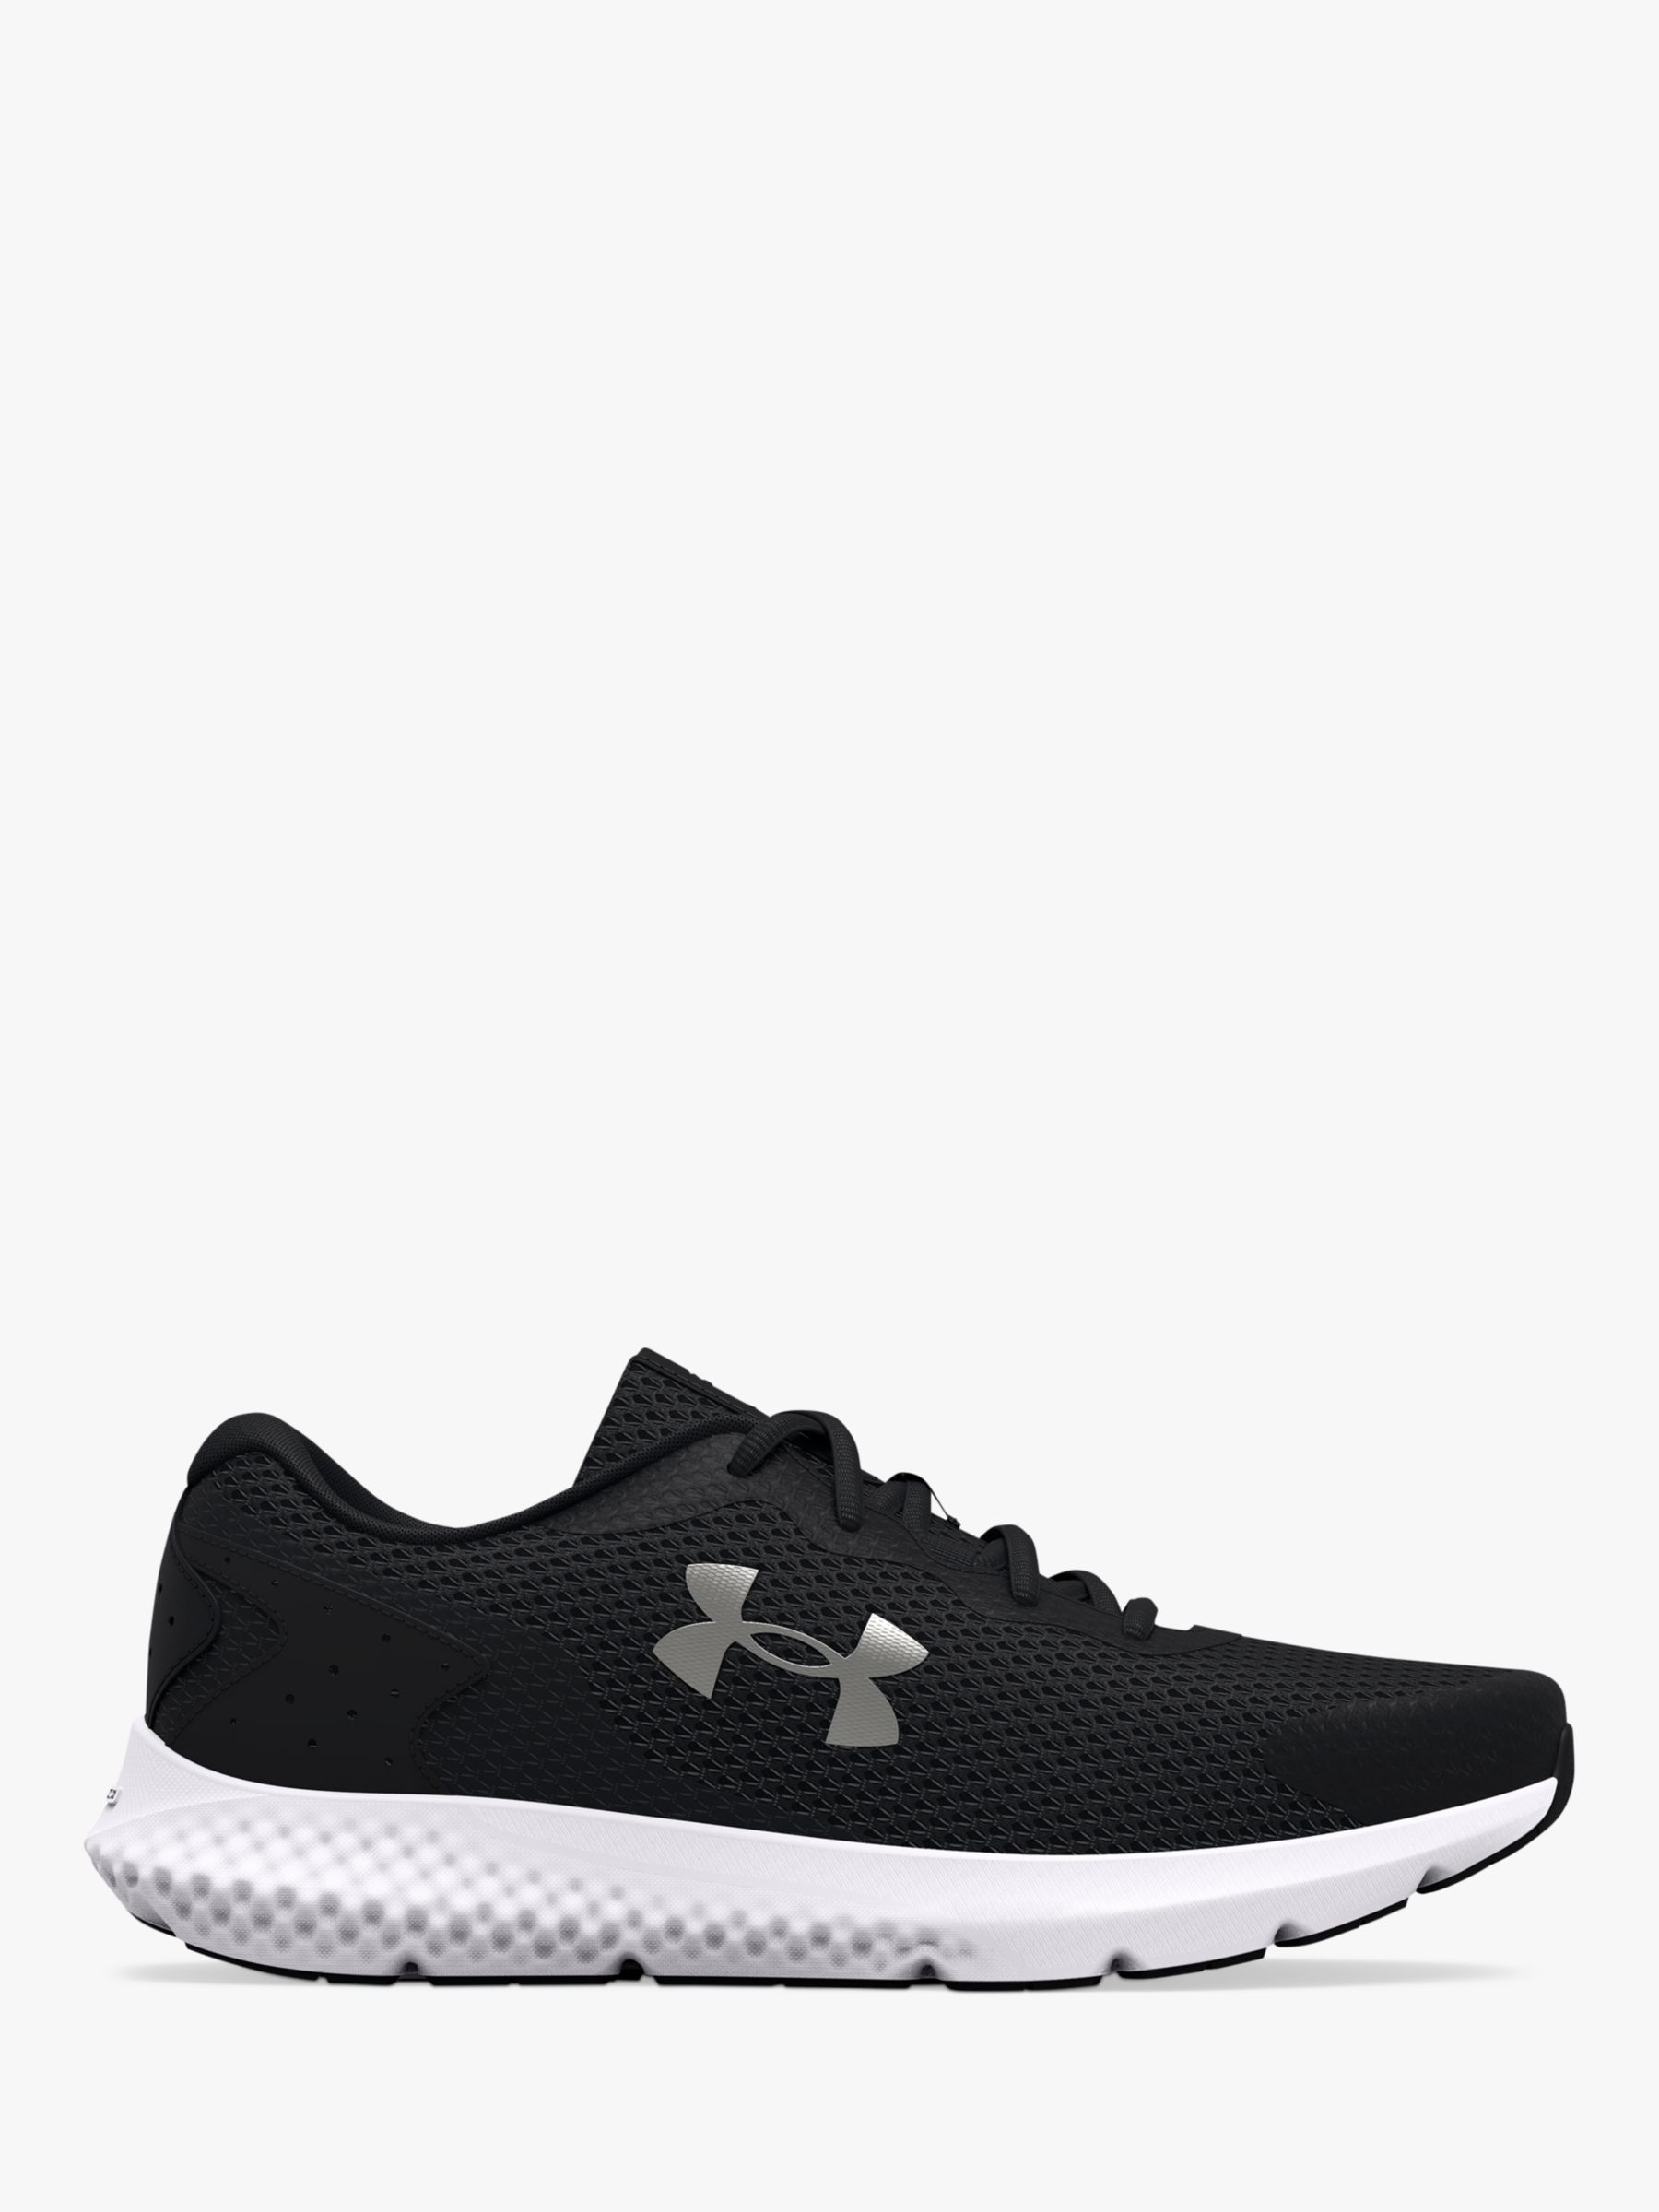 Under Armour Rogue 3 Women's Running Shoes, Black/Mod Grey at John Lewis & Partners